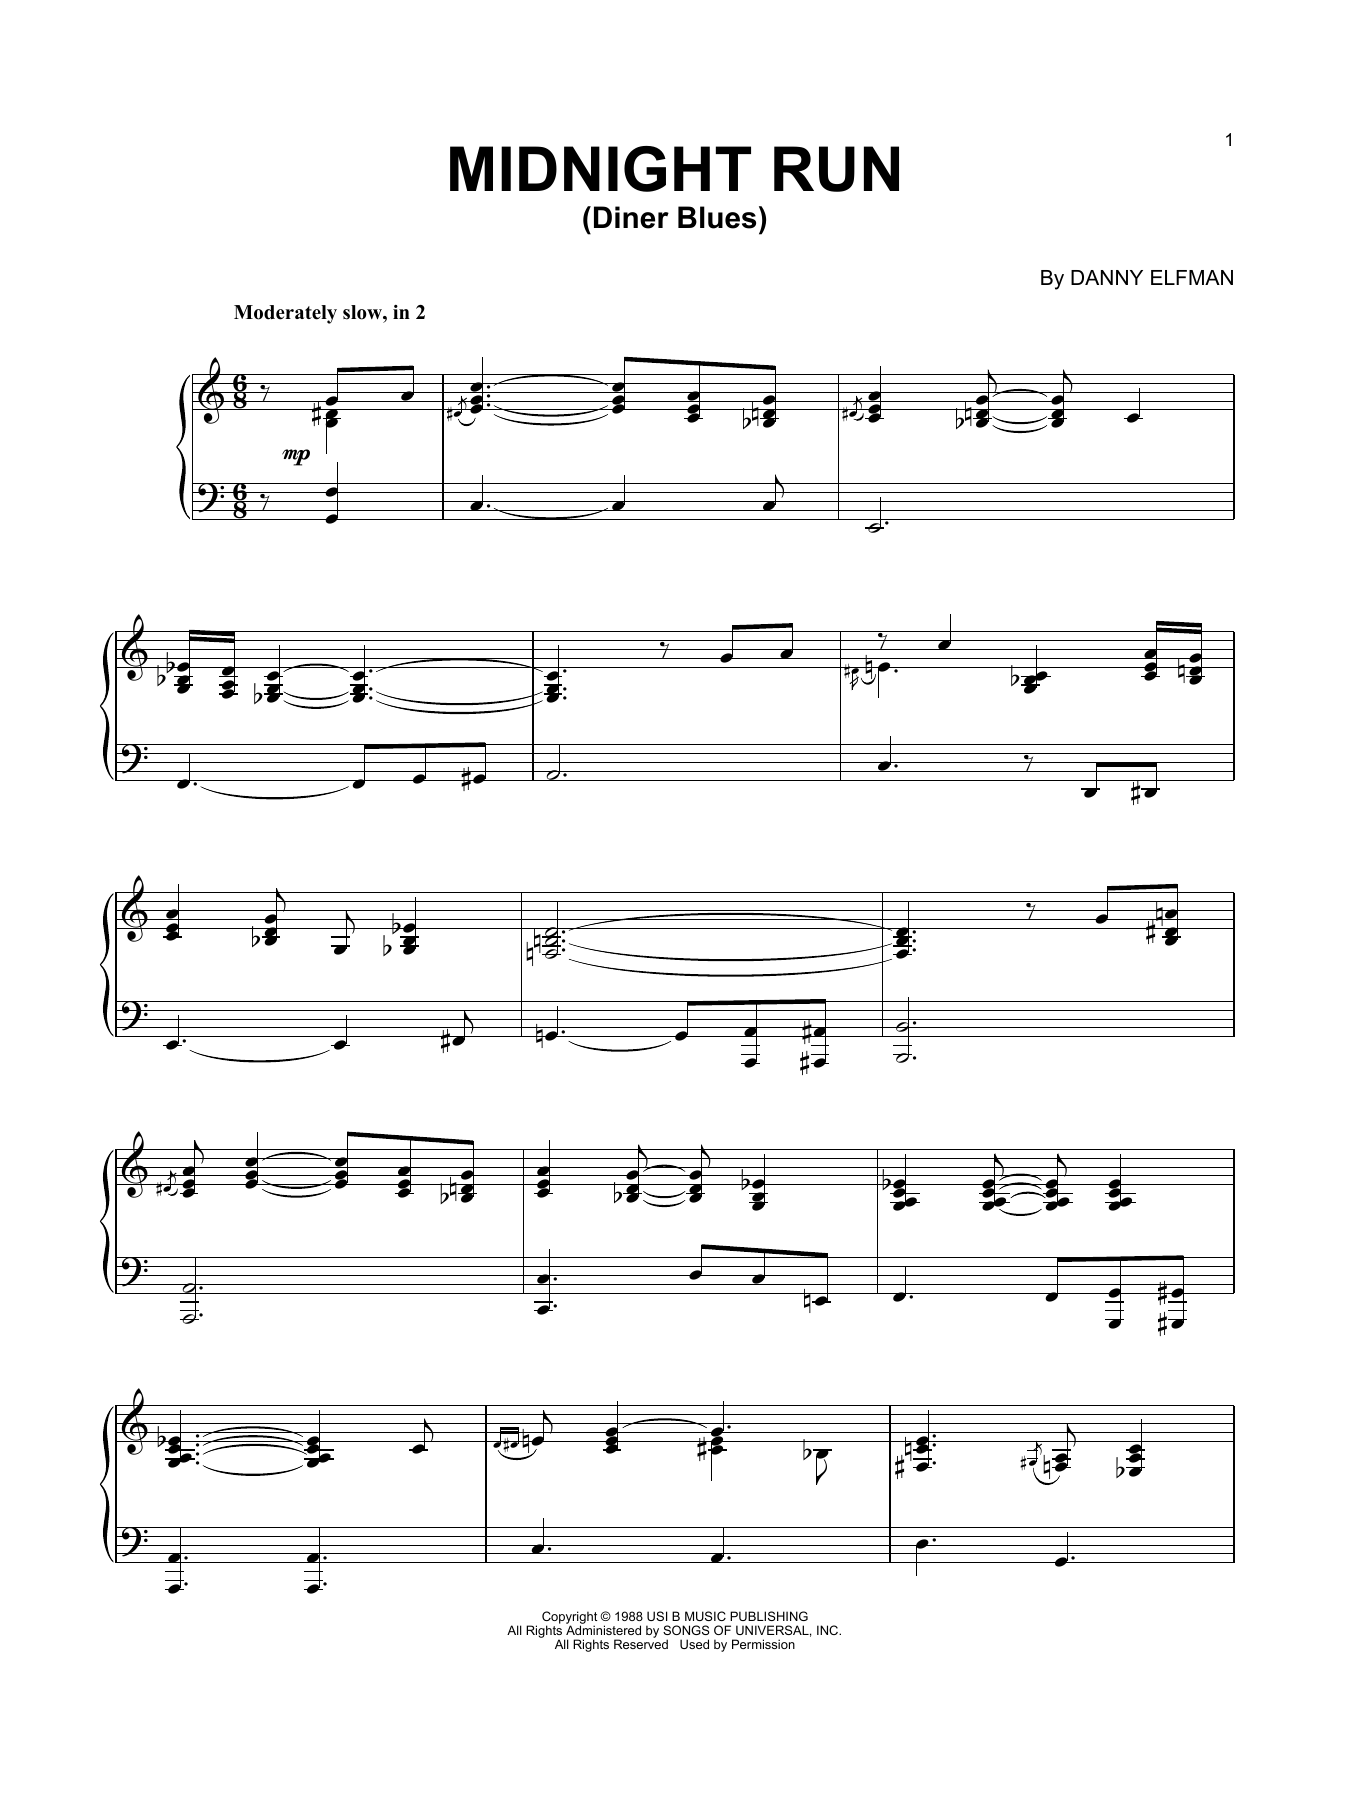 Download Danny Elfman Diner Blues (from Midnight Run) Sheet Music